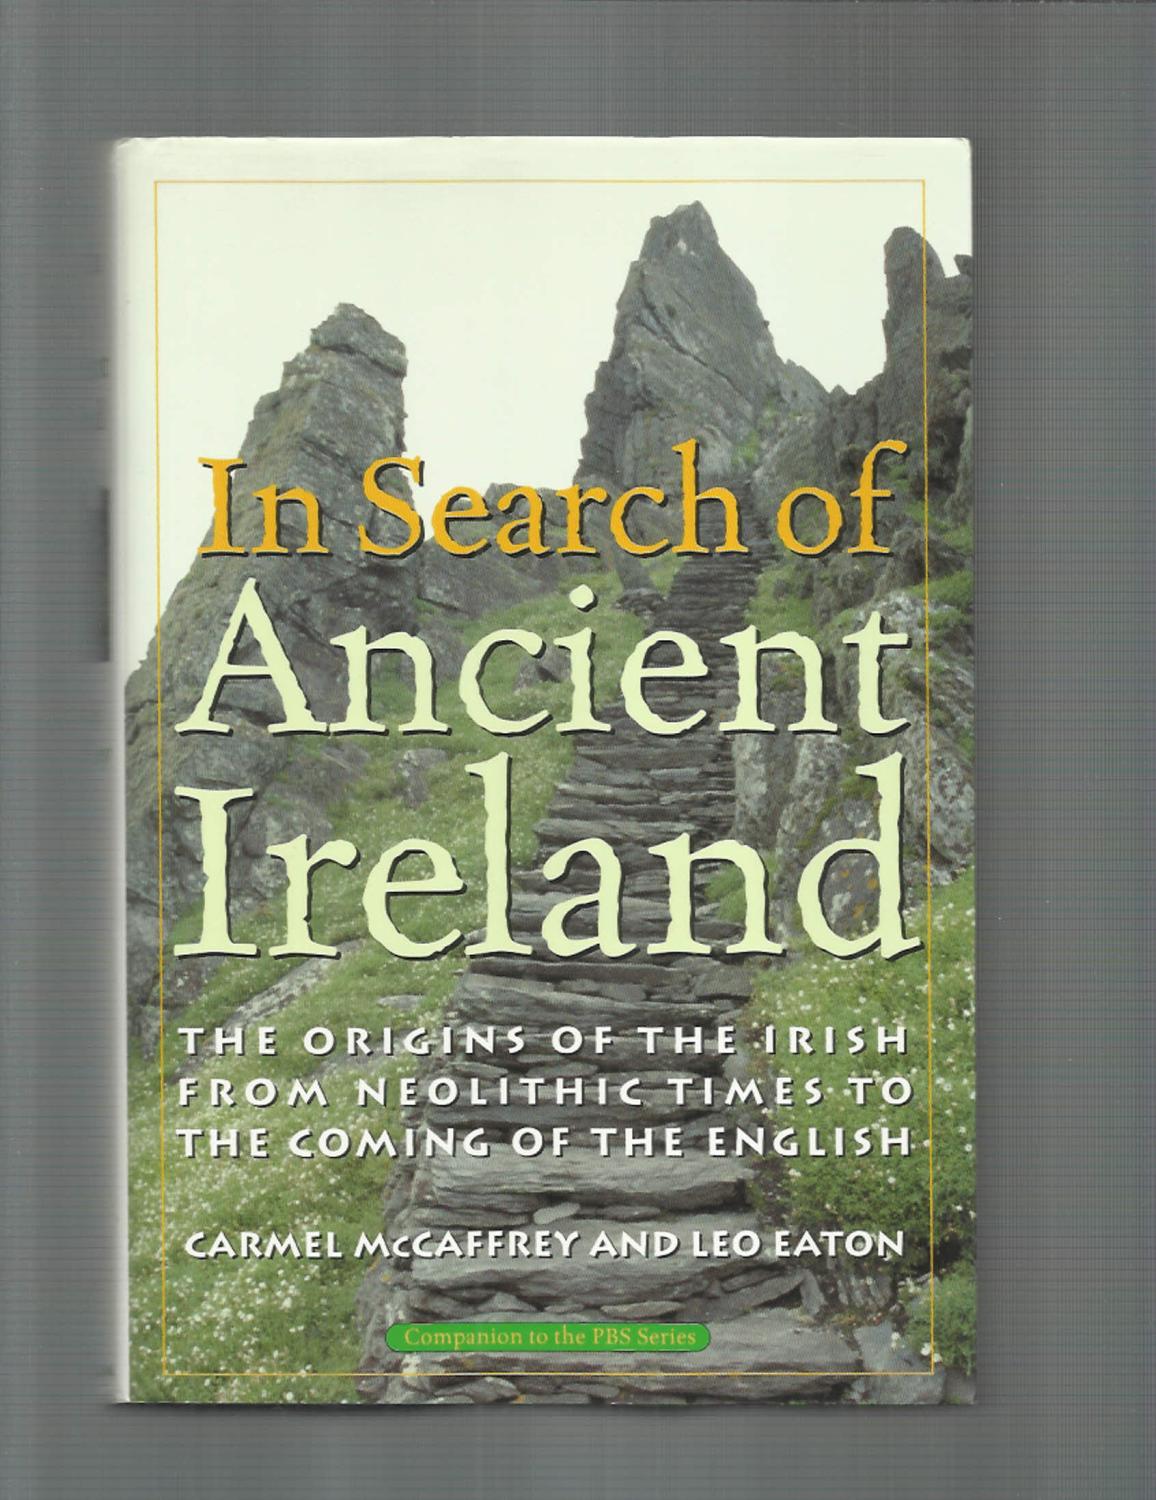 IN SEARCH OF ANCIENT IRELAND: The Origins Of The Irish From Neolithic Times To The Coming Of The English - McCaffrey Carmel & Leo Eaton